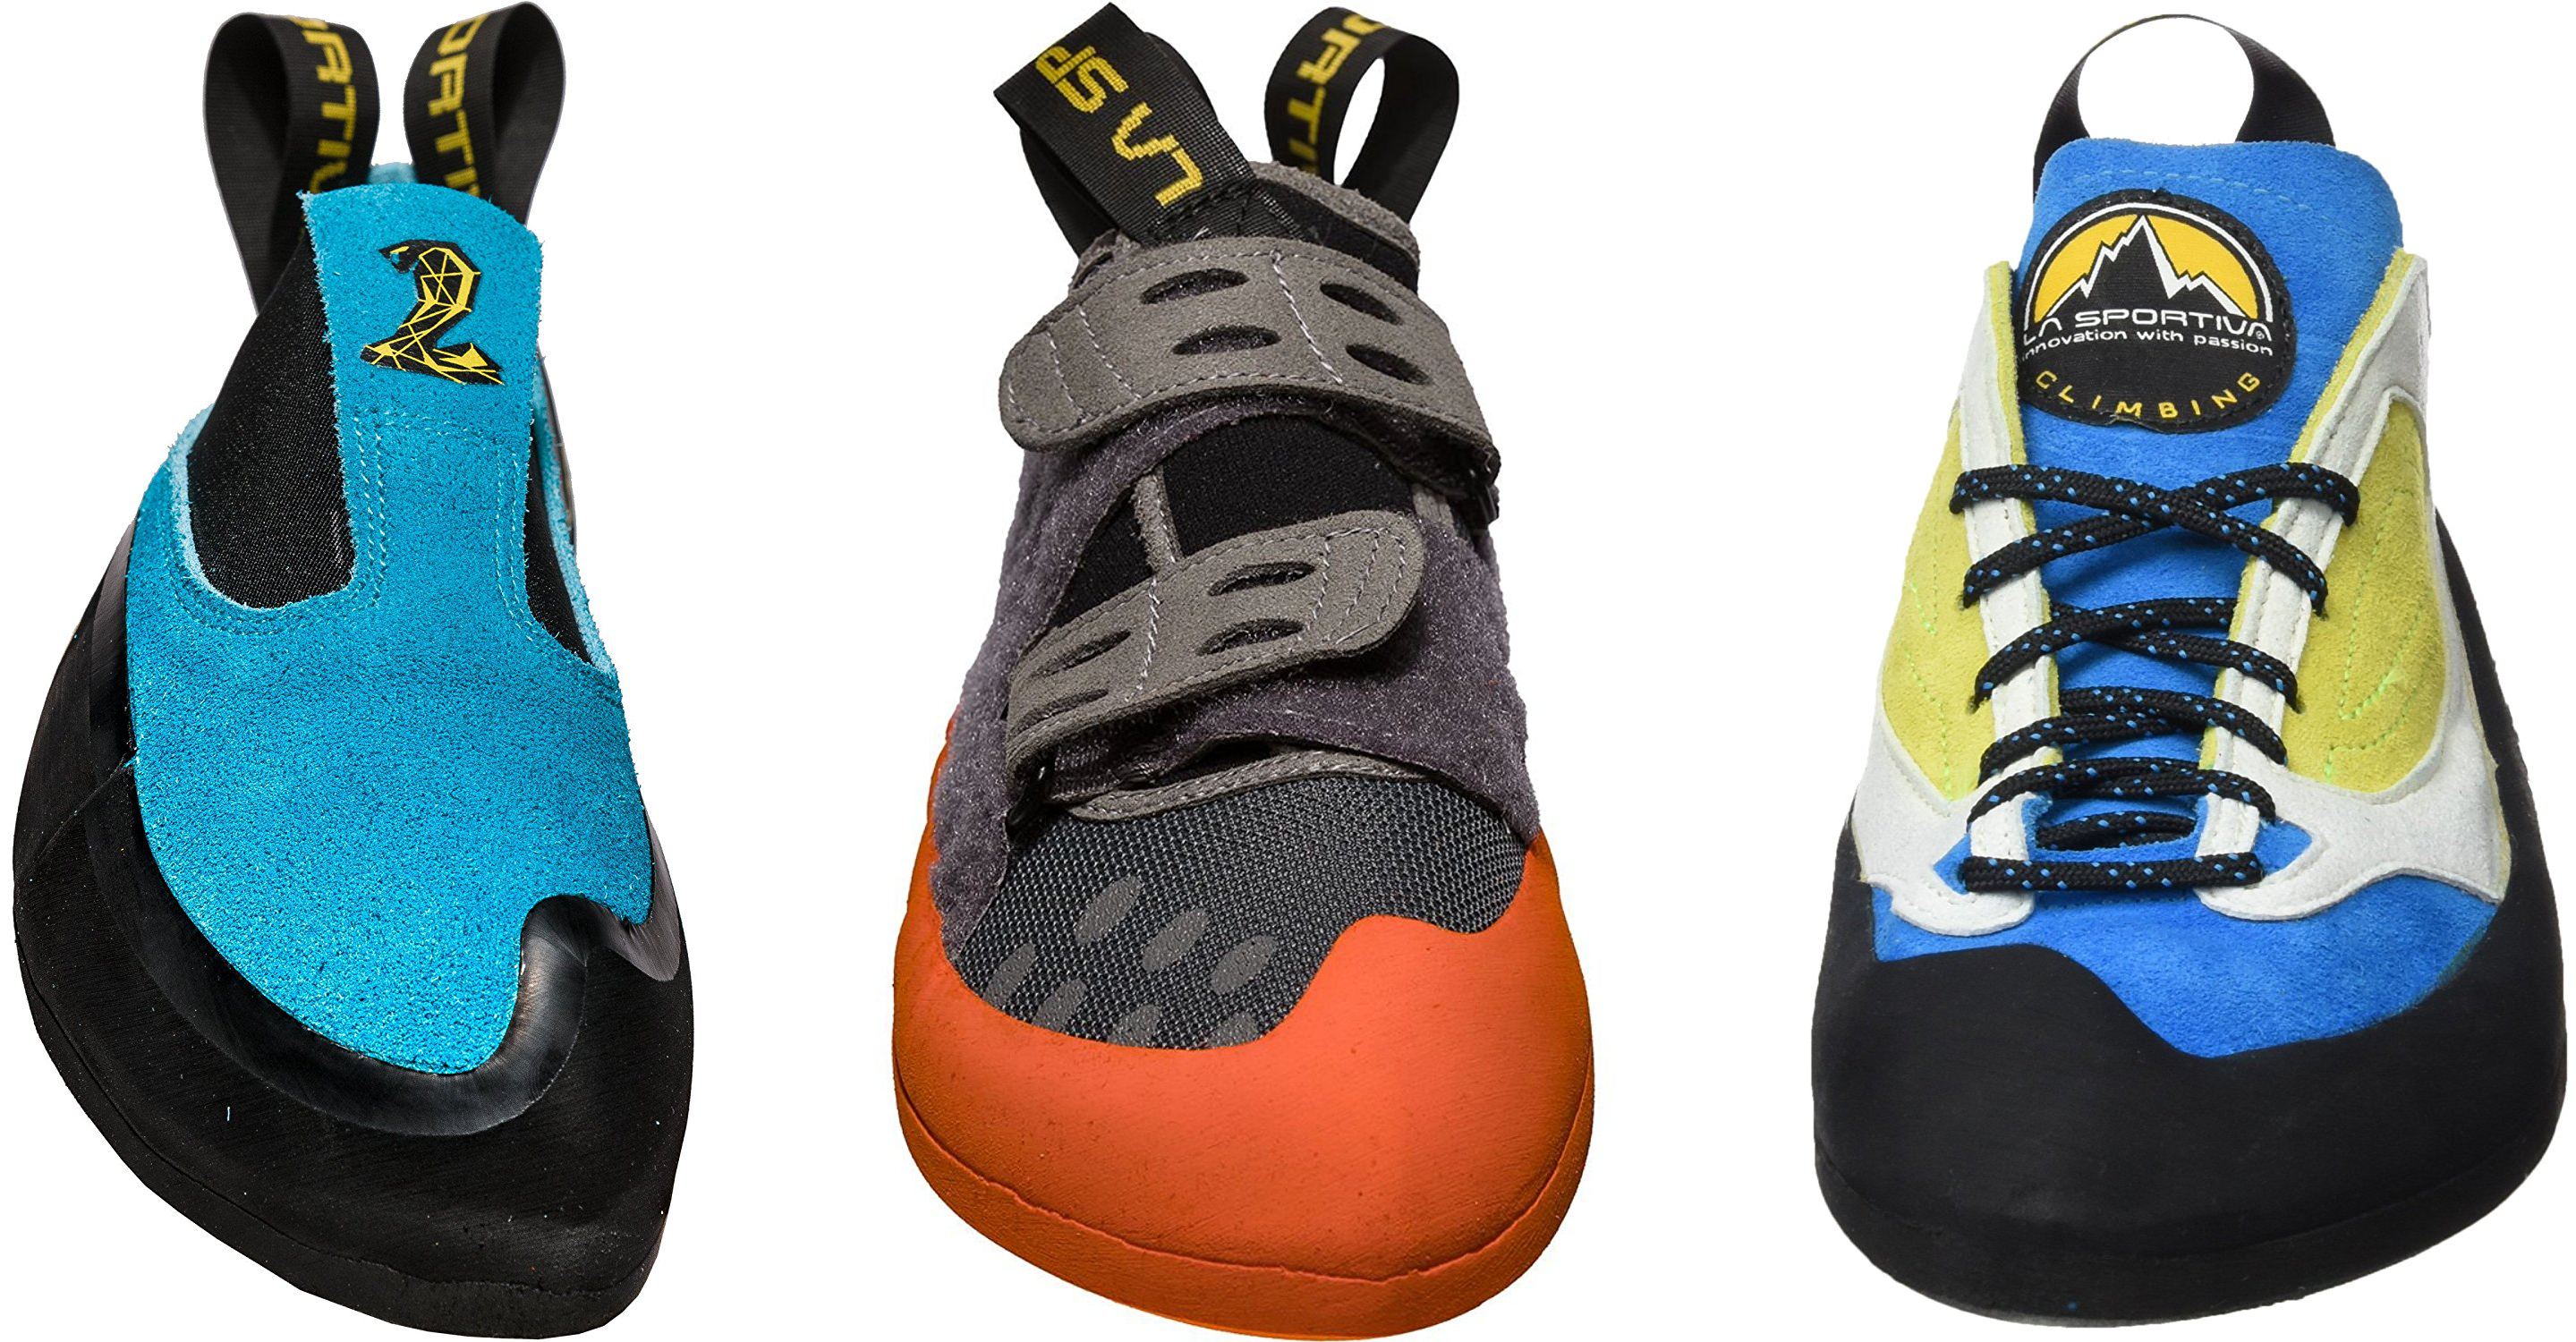 How To Choose Climbing Shoes: The 